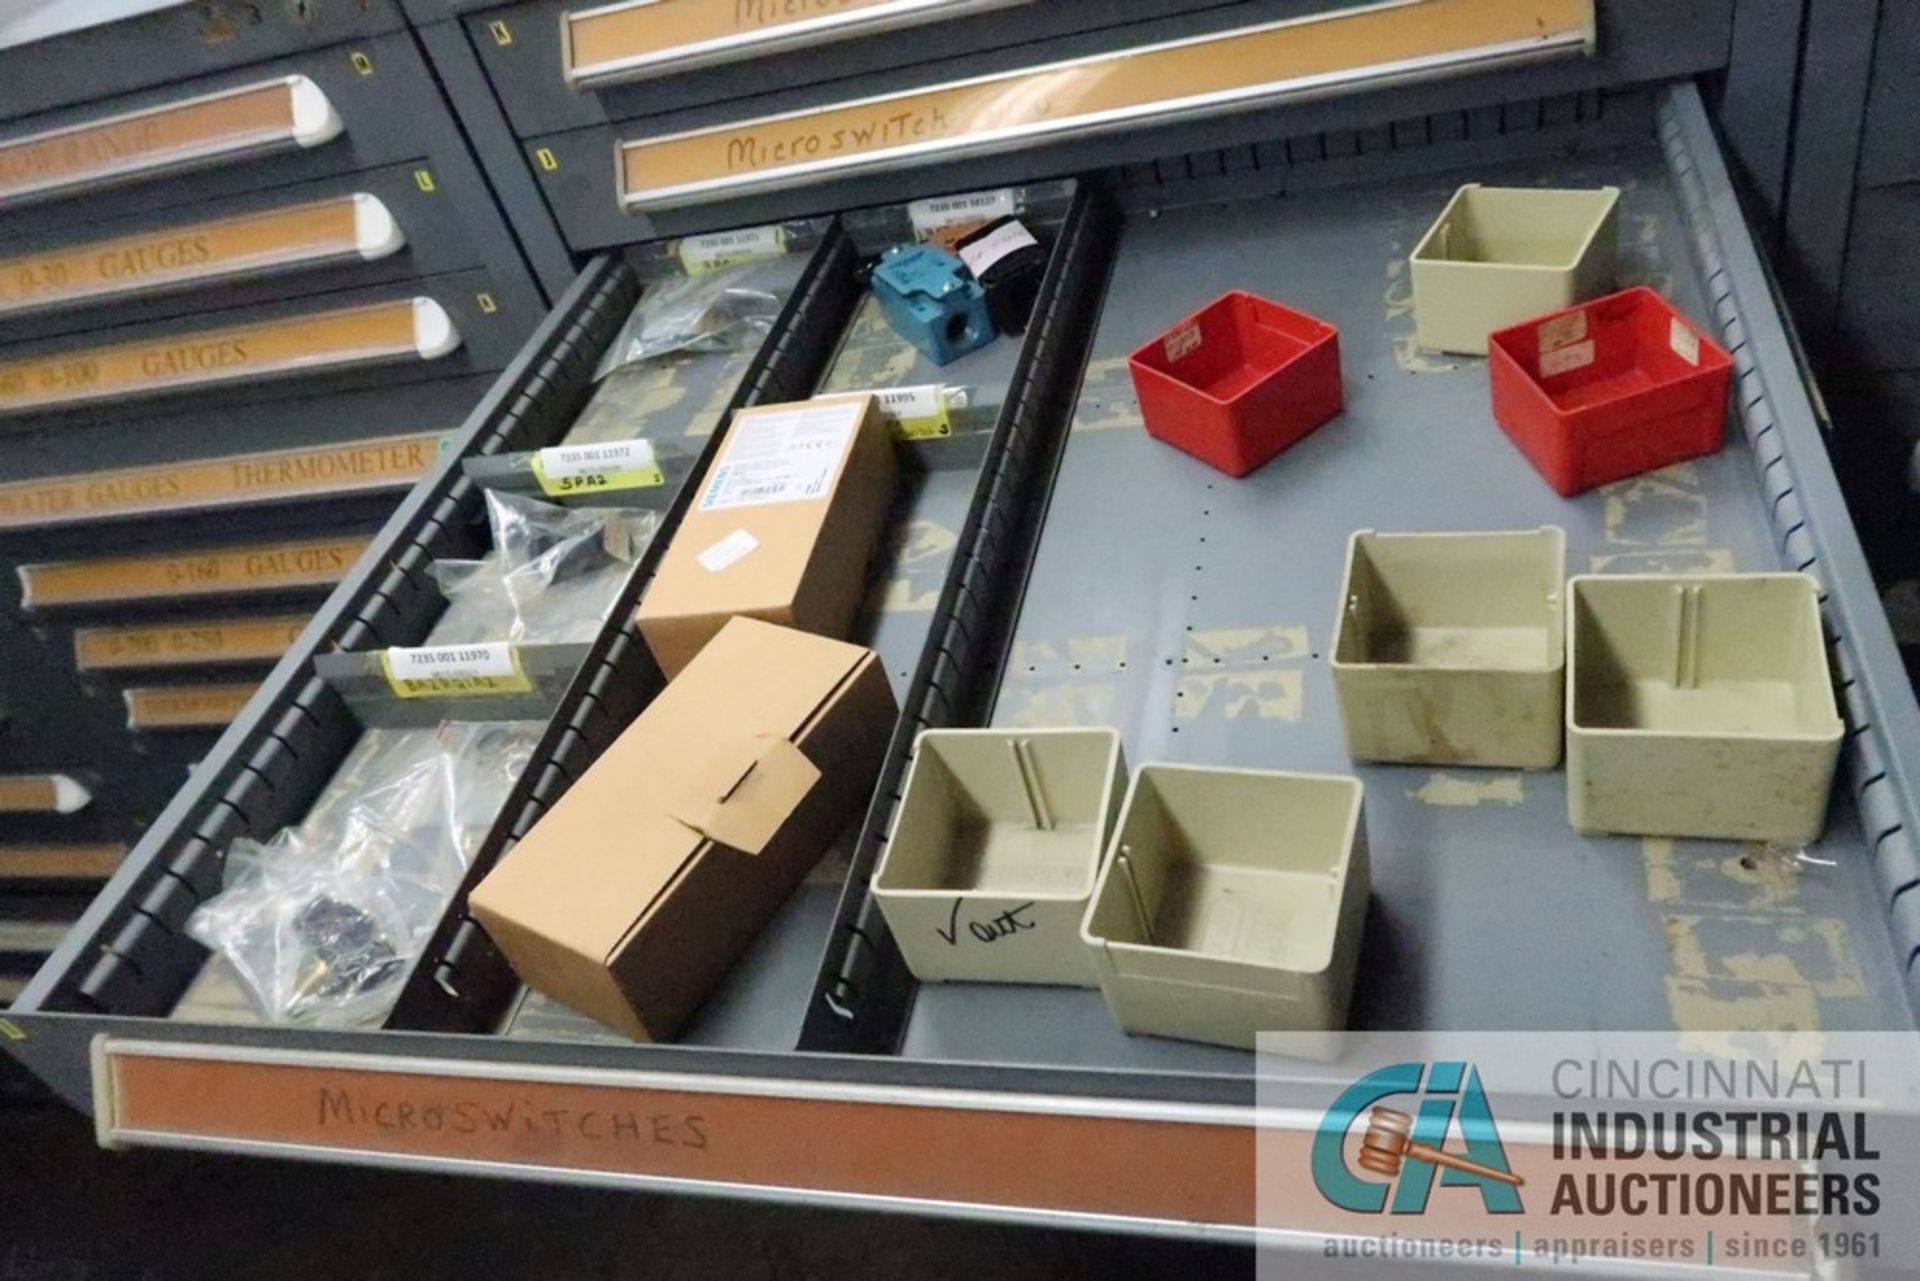 (LOT) 11-DRAWER VIDMAR CABINET WITH CONTENTS INCLUDING MISCELLANEOUS MICRO SWITCHES, BOX CONVEYOR - Image 4 of 12